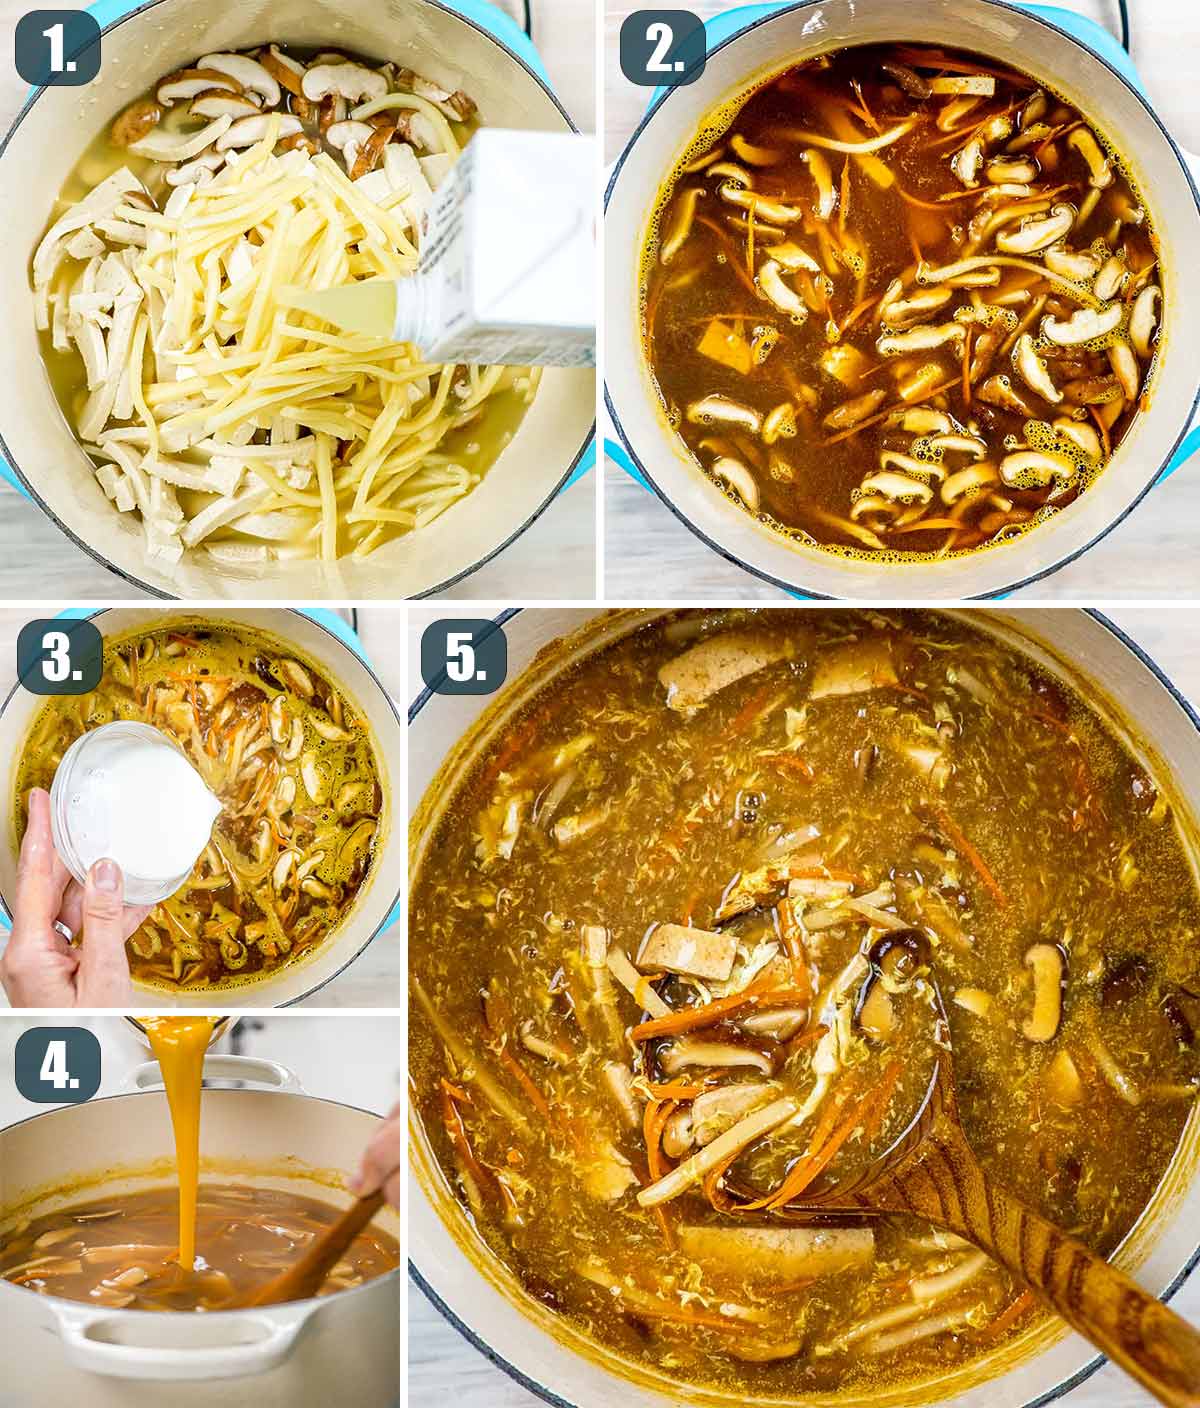 detailed process shots showing how to make hot and sour soup.